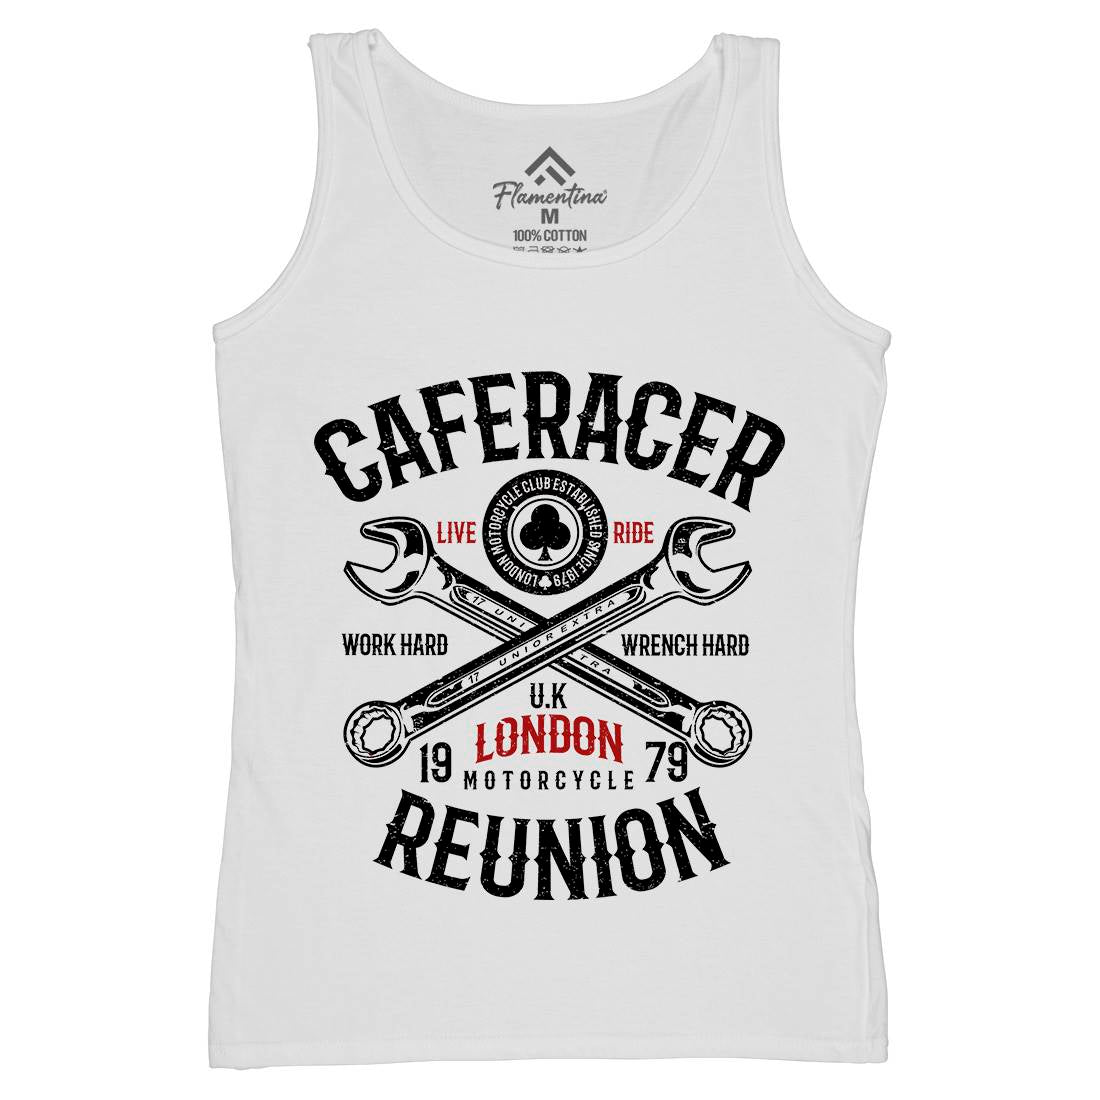 Caferacer Reunion Womens Organic Tank Top Vest Motorcycles A025